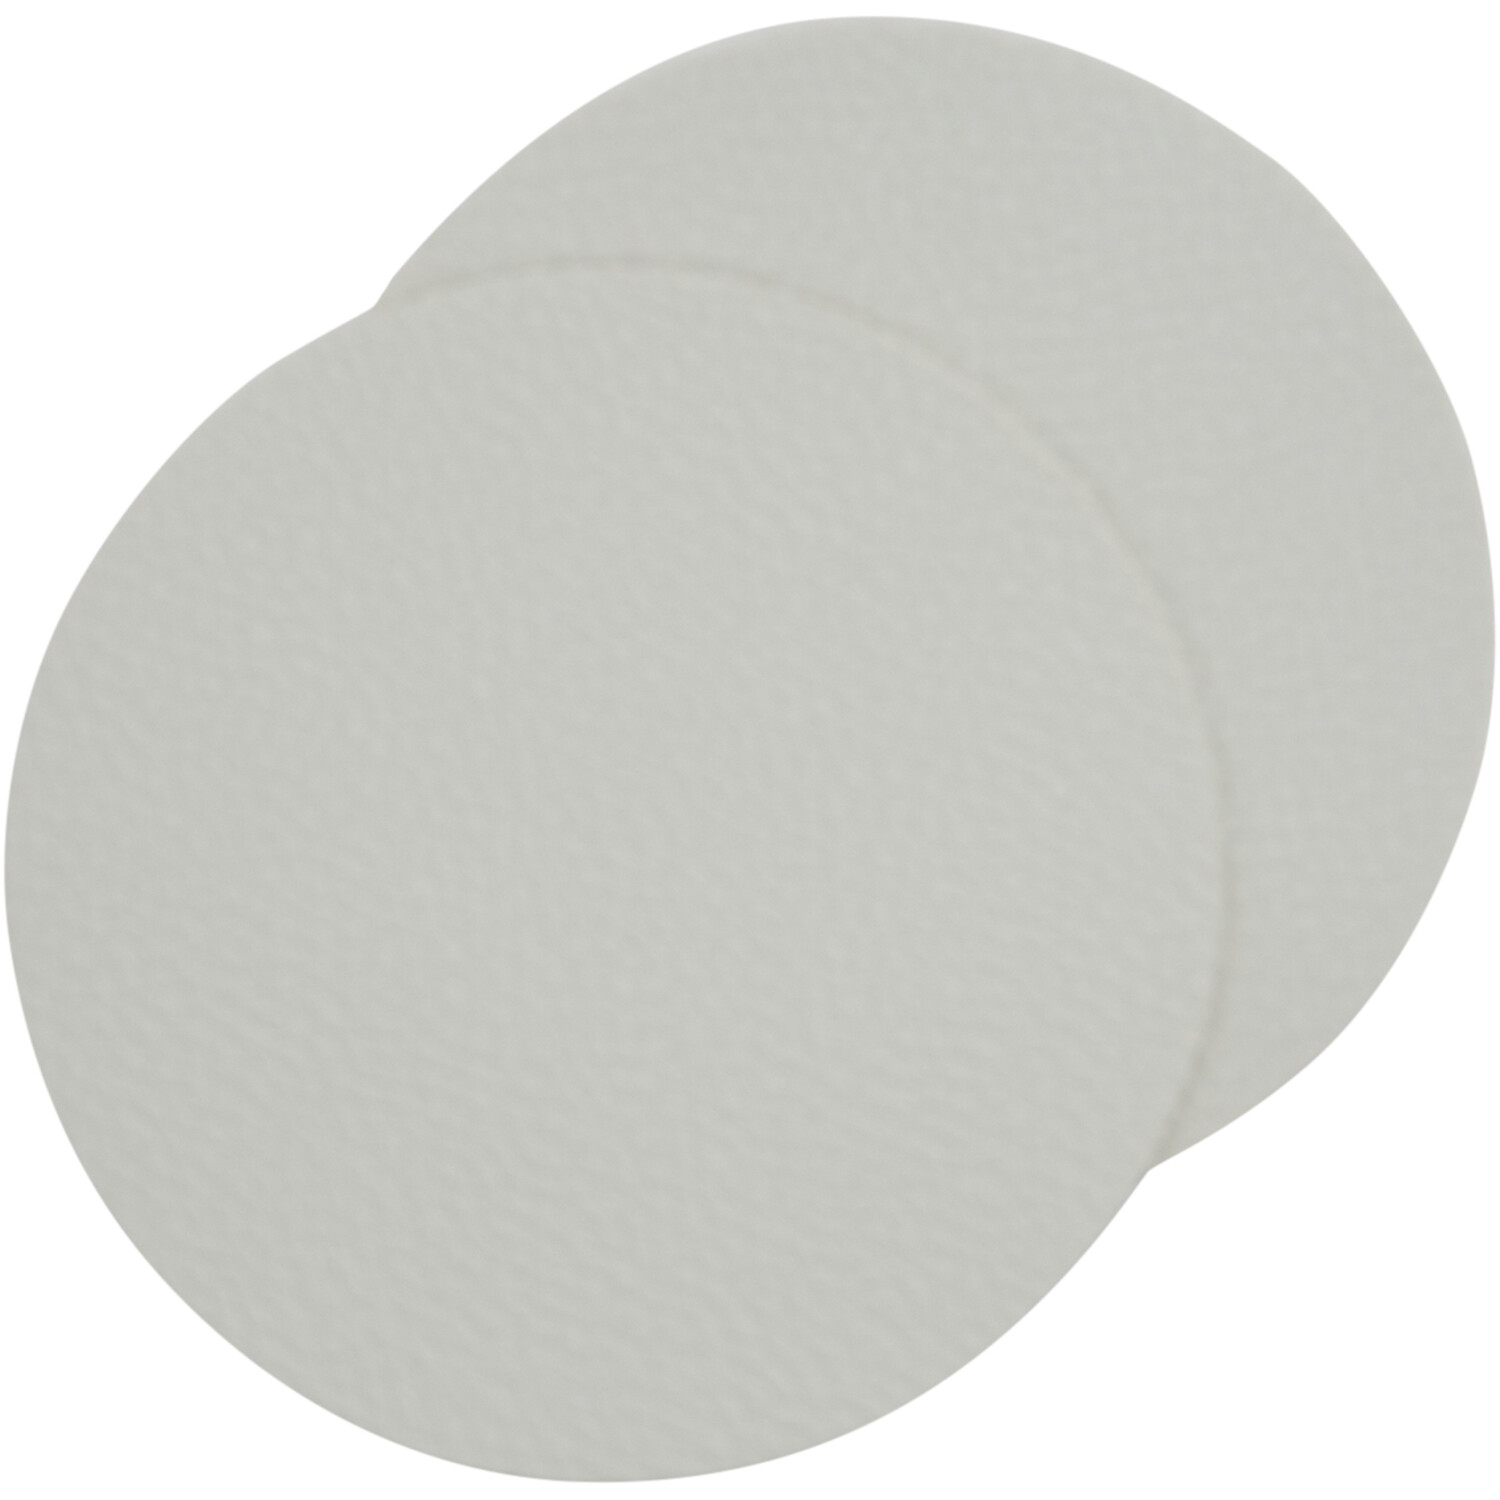 Set of 4 Round Fusion Faux Leather Coasters - Grey Image 1